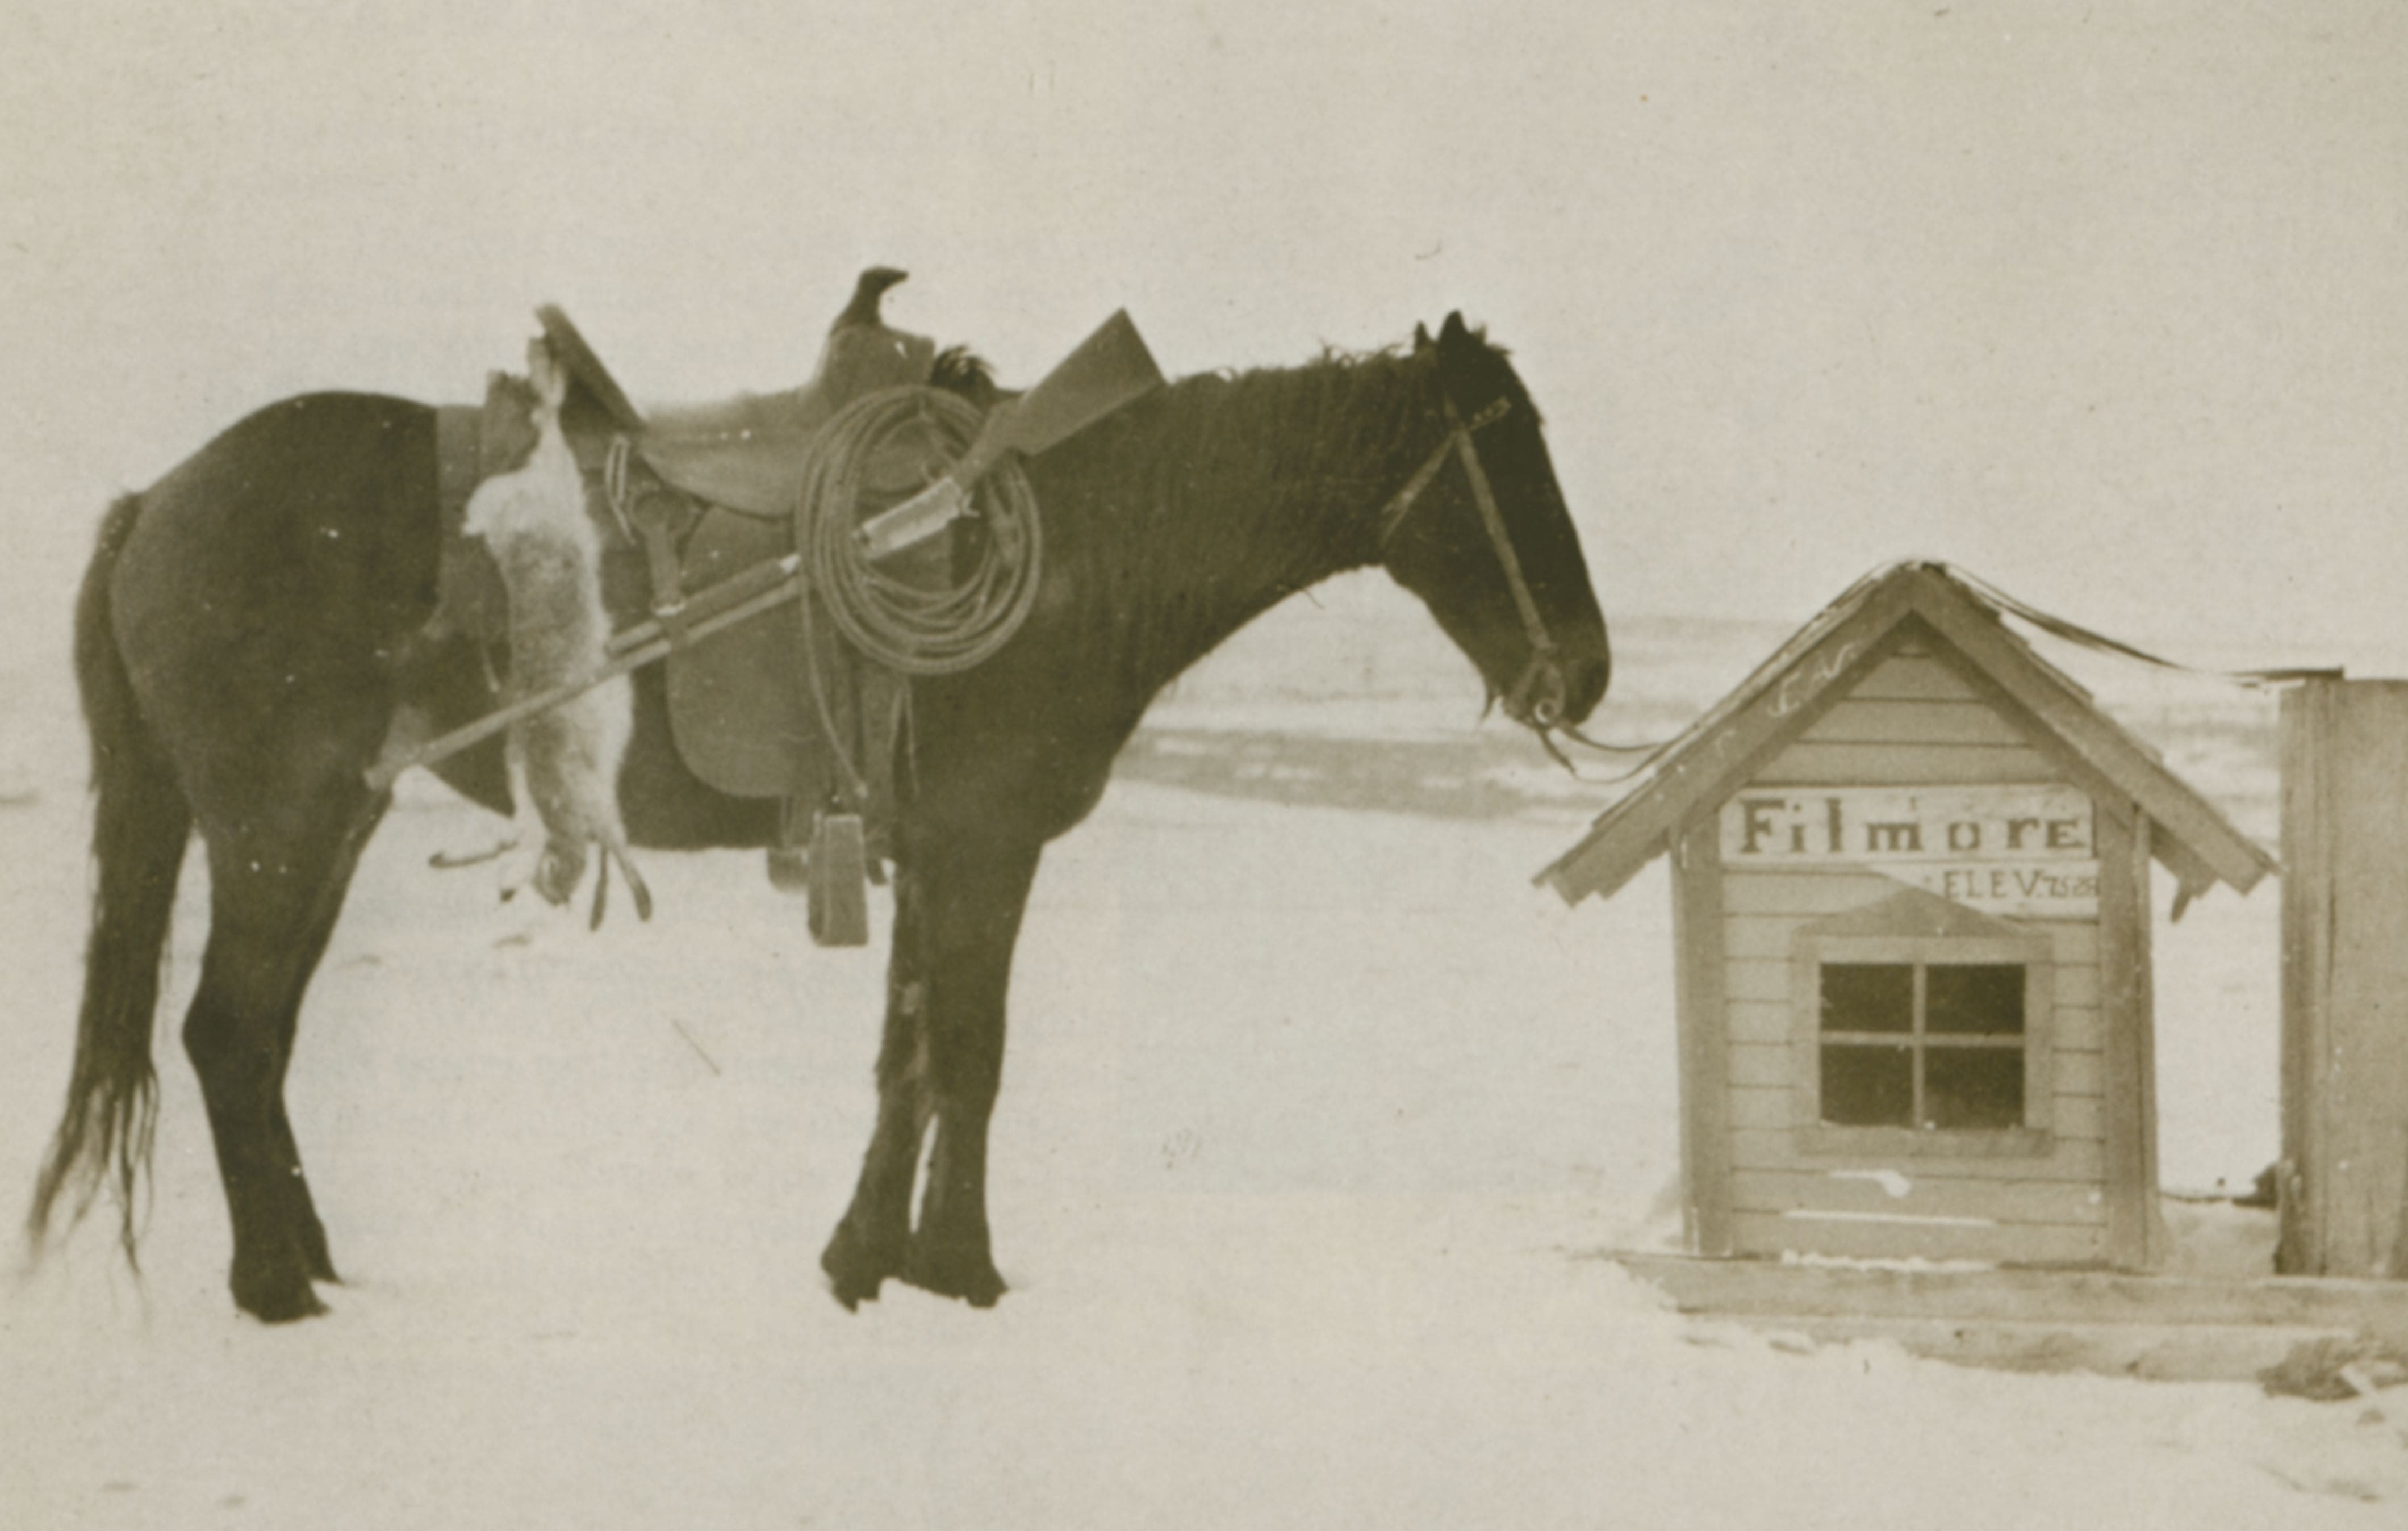 Photo of a horse, wearing a saddle, hitched to a tiny house-like building. The building has siding, a window, and a pitched roof. There is a wooden sign with the words "Filmore Elev. 7525 ft" mounted above the window. The horse appears to be standing in the few inches of snow that have covered the ground, and there is a dead rabbit hanging down alongside the horse, from the back of the saddle. A coiled rope and a rifle are affixed to the right side of the horse's saddle, next to the rabbit.